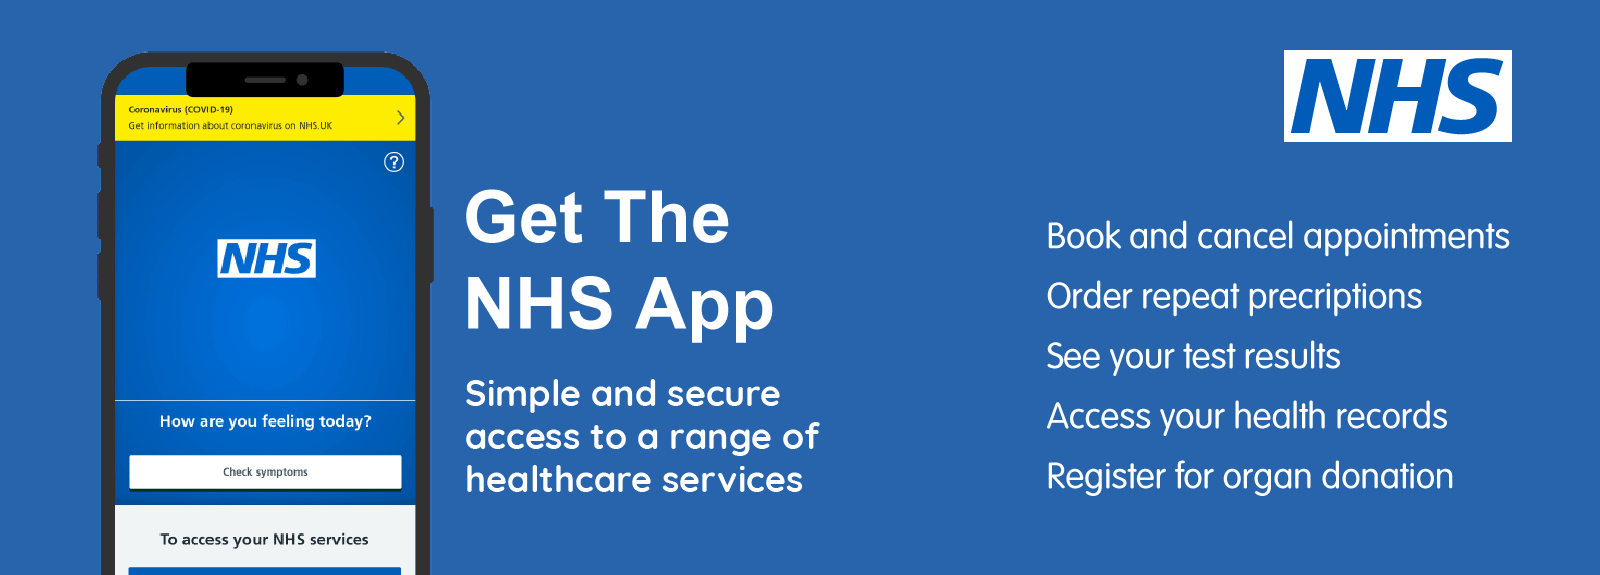 Use the NHS App for a range of services including ordering prescriptions